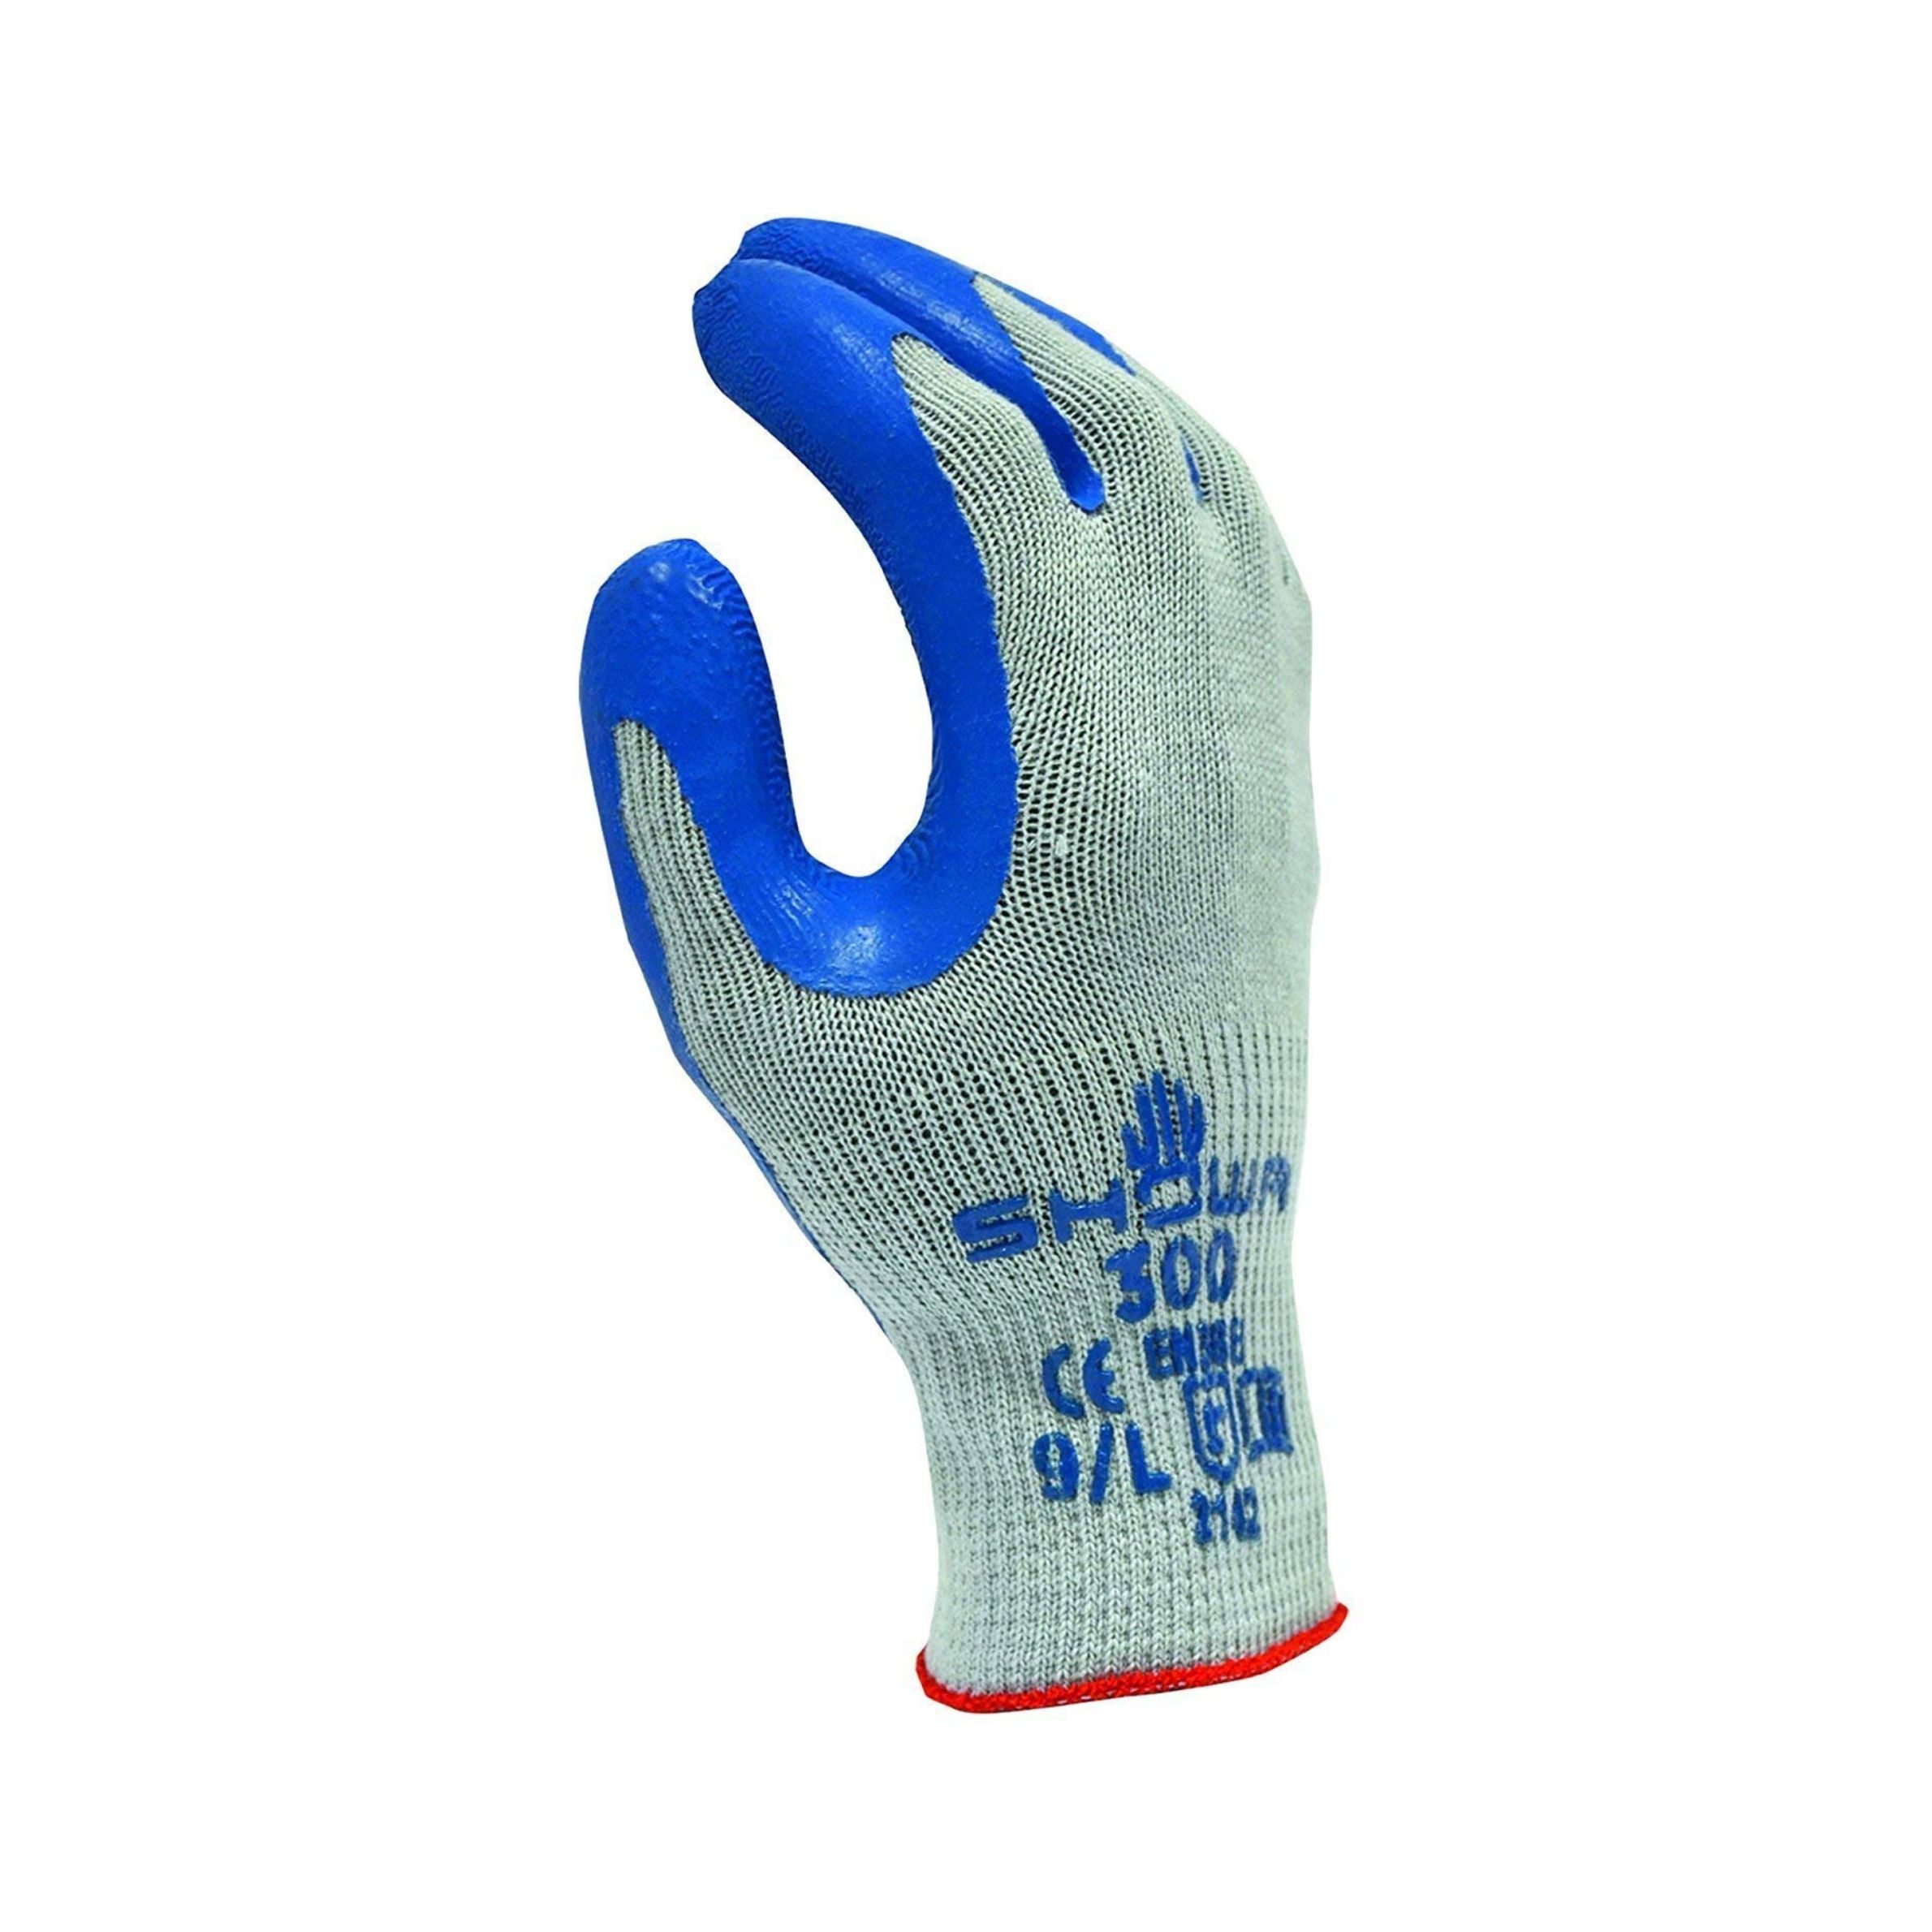 Showa 300L-09 Atlas Fit 300 Rubber-Coated Gloves